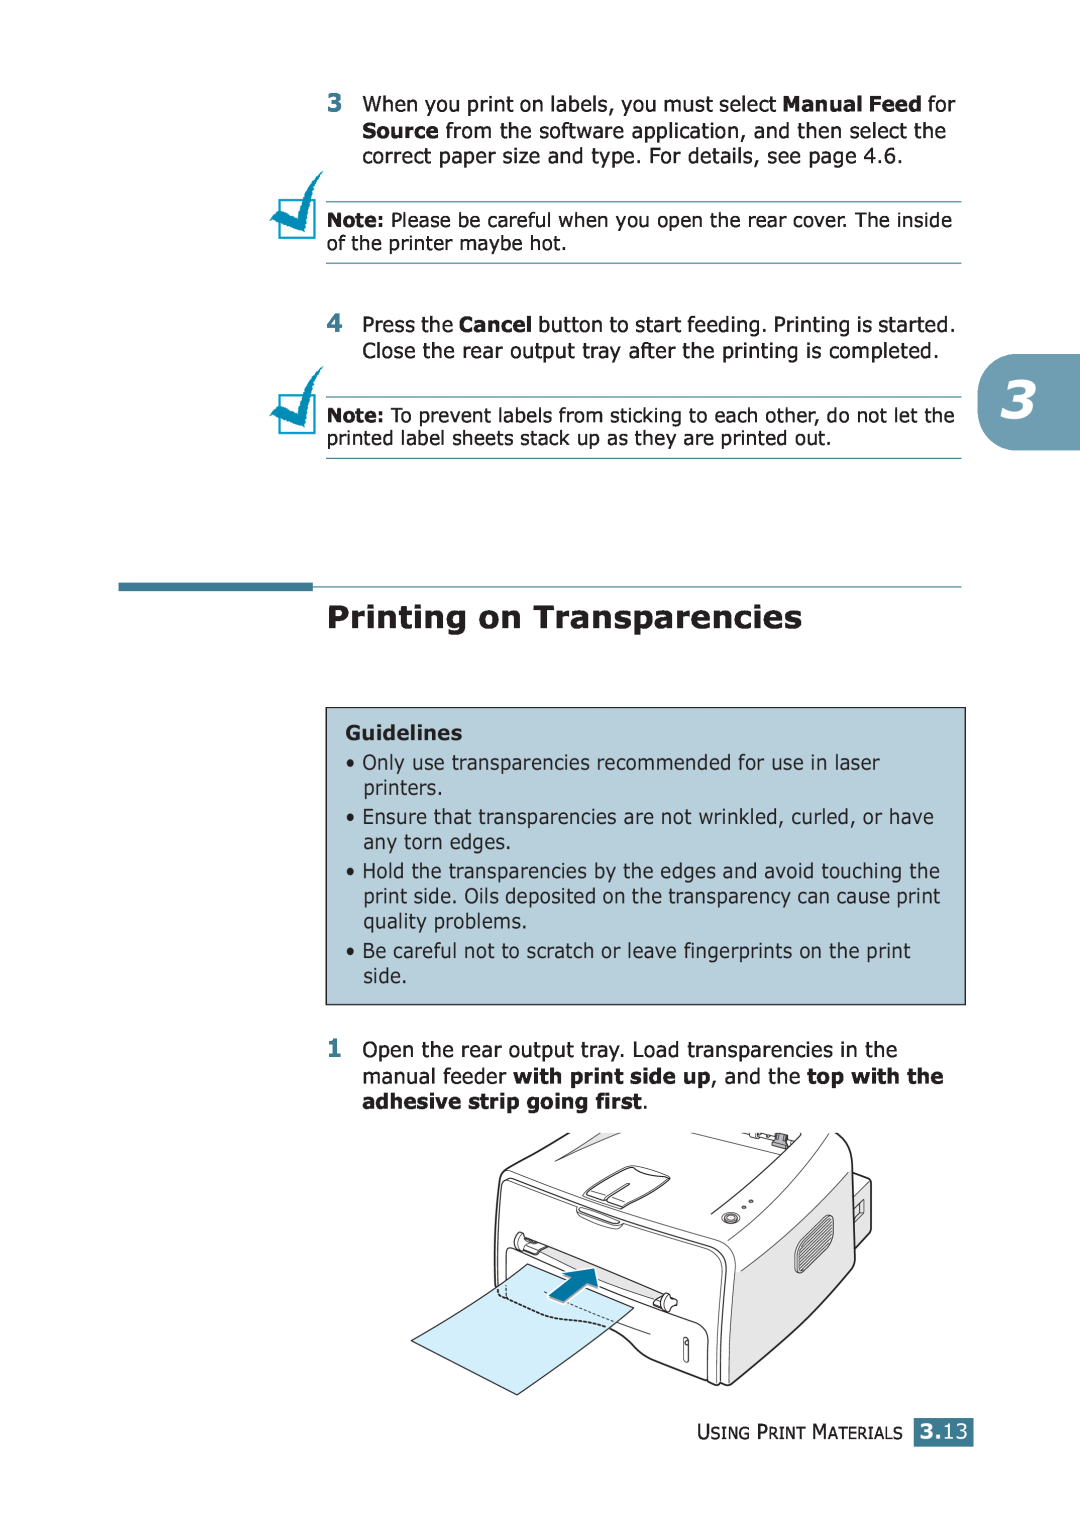 Samsung ML-1710P manual Printing on Transparencies, printed label sheets stack up as they are printed out, Guidelines 